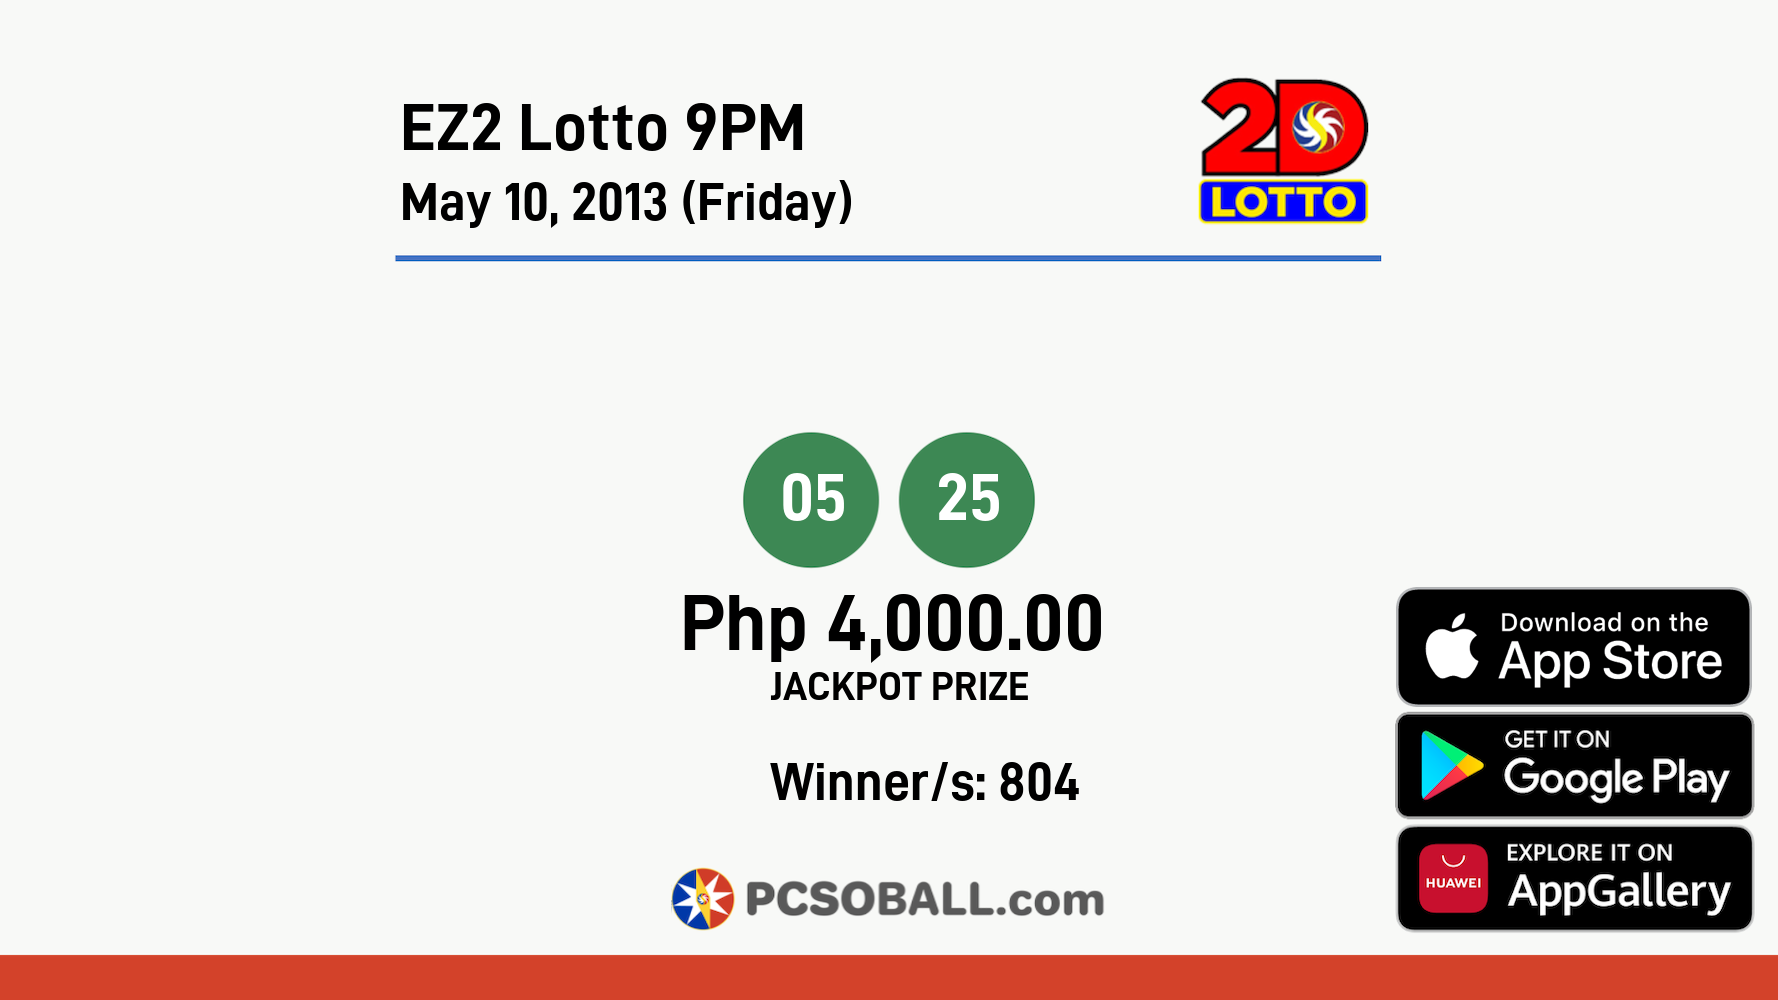 EZ2 Lotto 9PM May 10, 2013 (Friday) Result